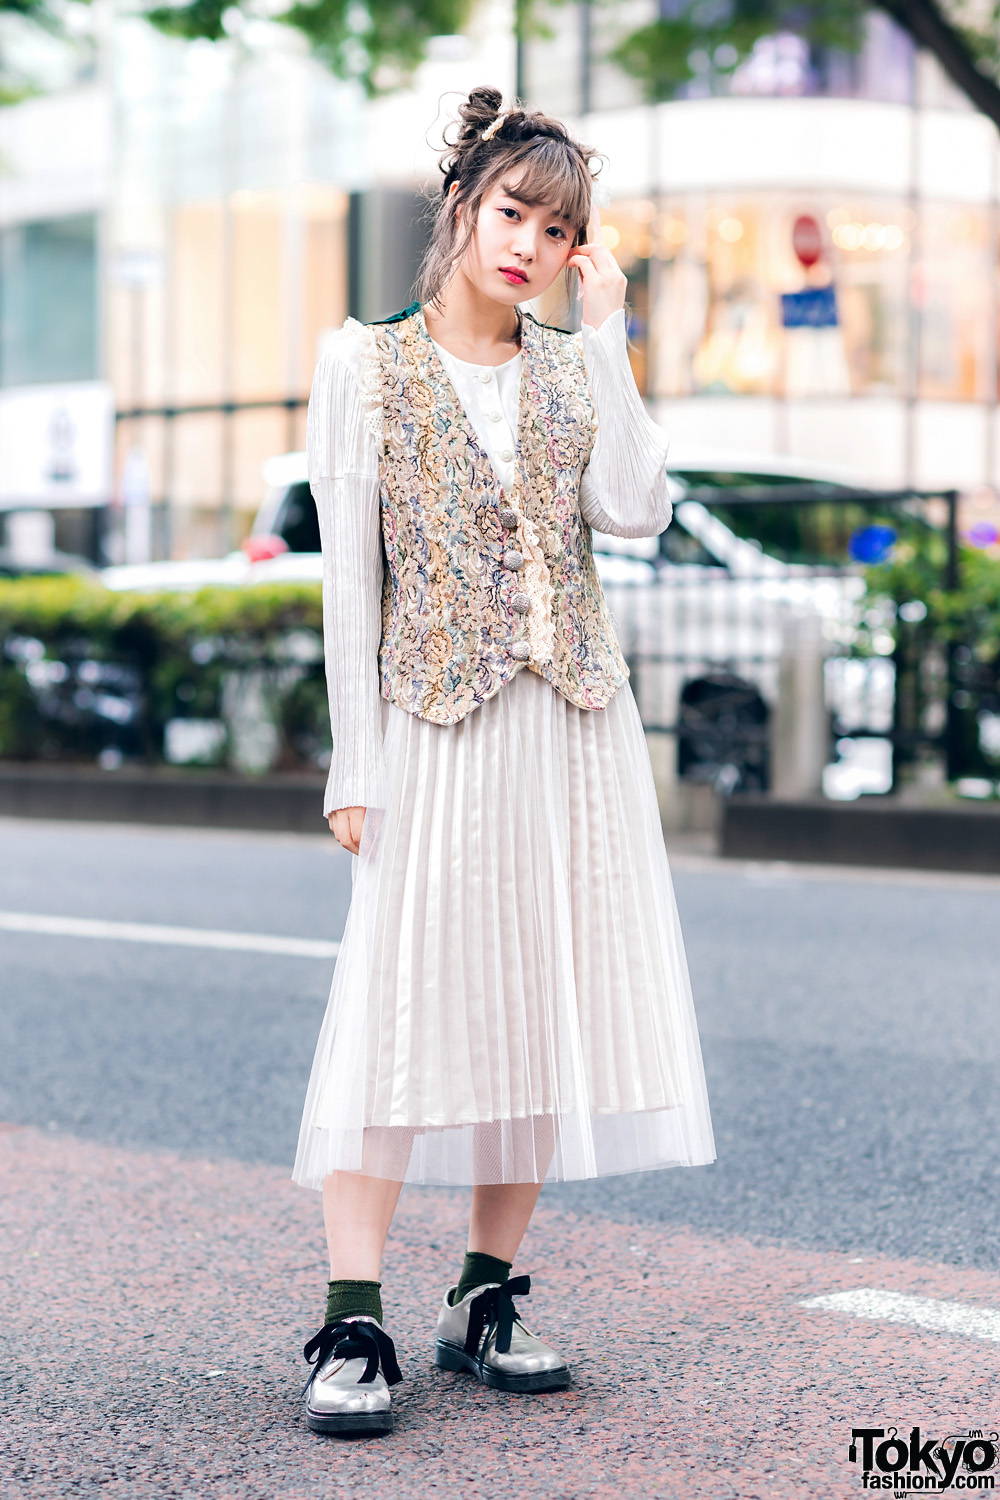 Chic Vintage Harajuku Street Style w/ Updo Hairstyle, Pleated Sheer Dress, Floral Brocade Vest & Vintage Lace-Up Bow Shoes